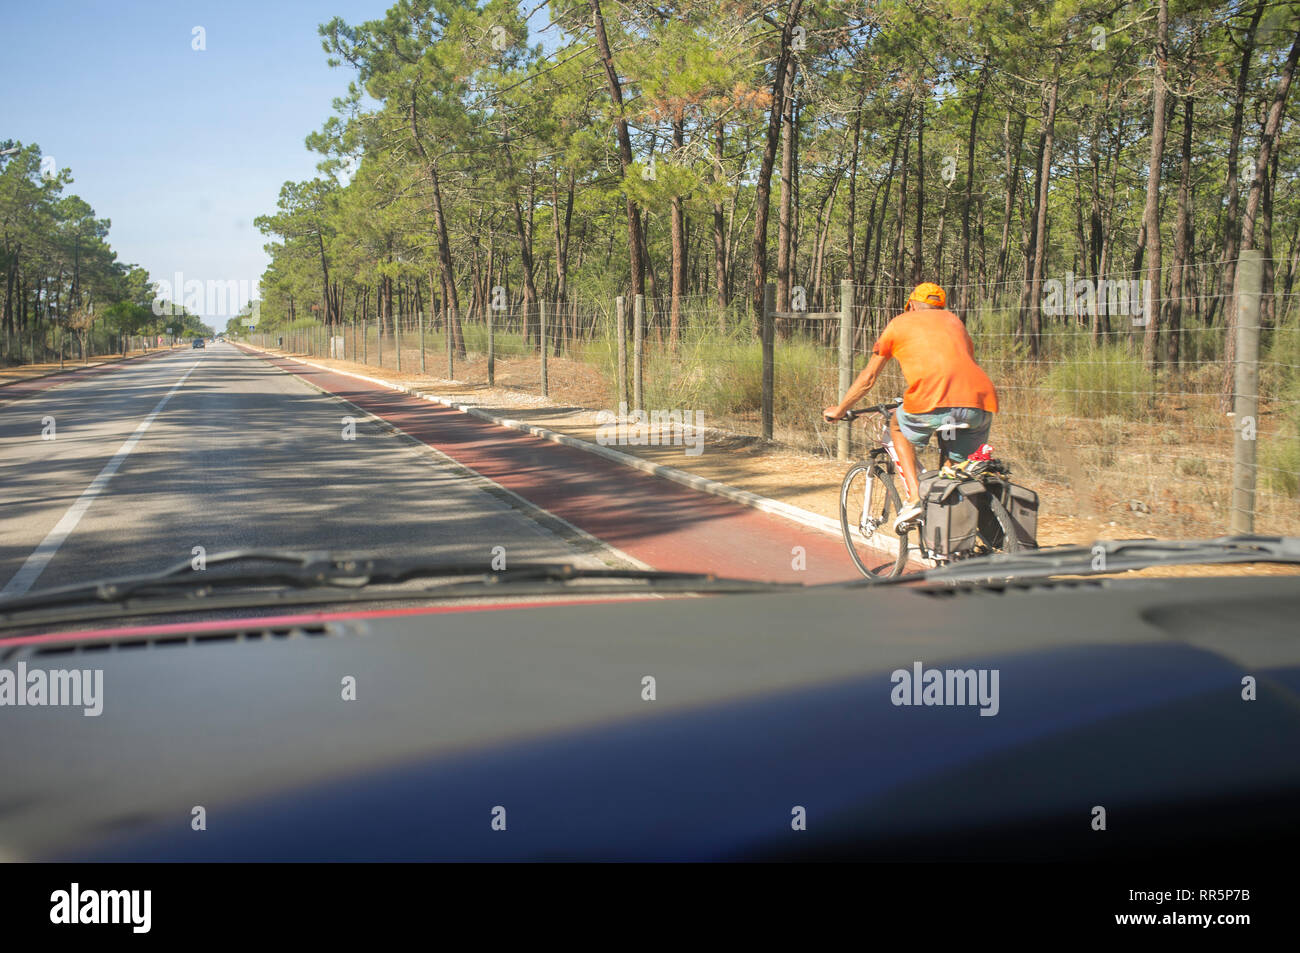 Driving carefully with senior cyclists on bike lane at country road. View from the inside of the car Stock Photo